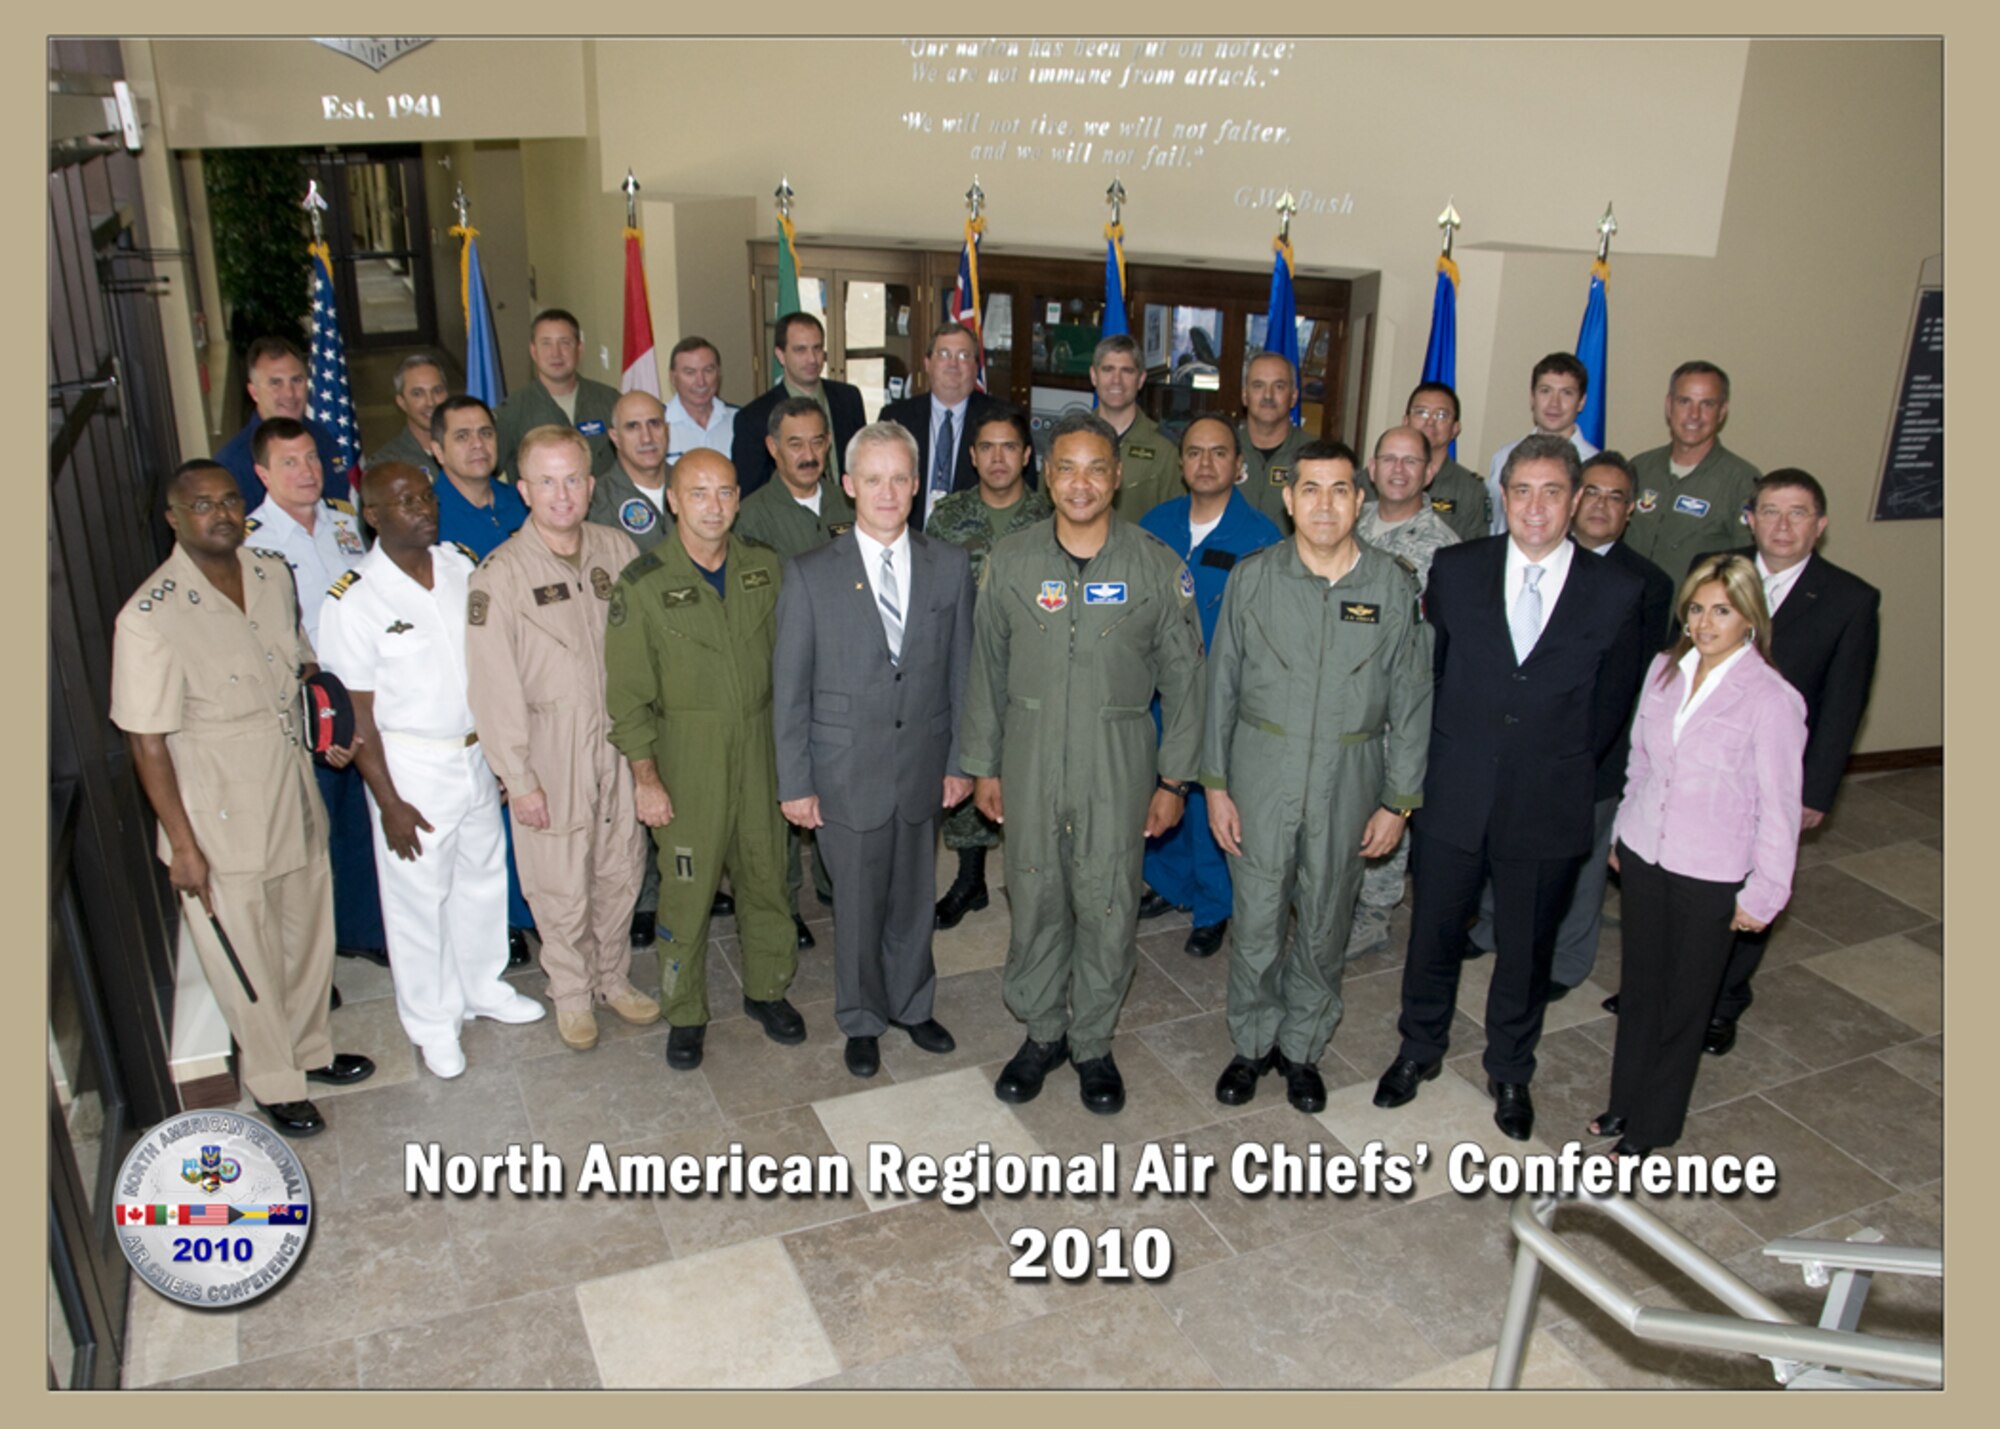 Participants of the North American Regional Air Chiefs Conference pose for a group photo in the Killey Center for Homeland Operations at Tyndall AFB, Fla., July 12-15, 2010.  The air domain experts attended the 3-day conference to ‘forge partnerships’ that impact air domain issues in North America.  (U.S. Air Force photo by Lisa Norman)